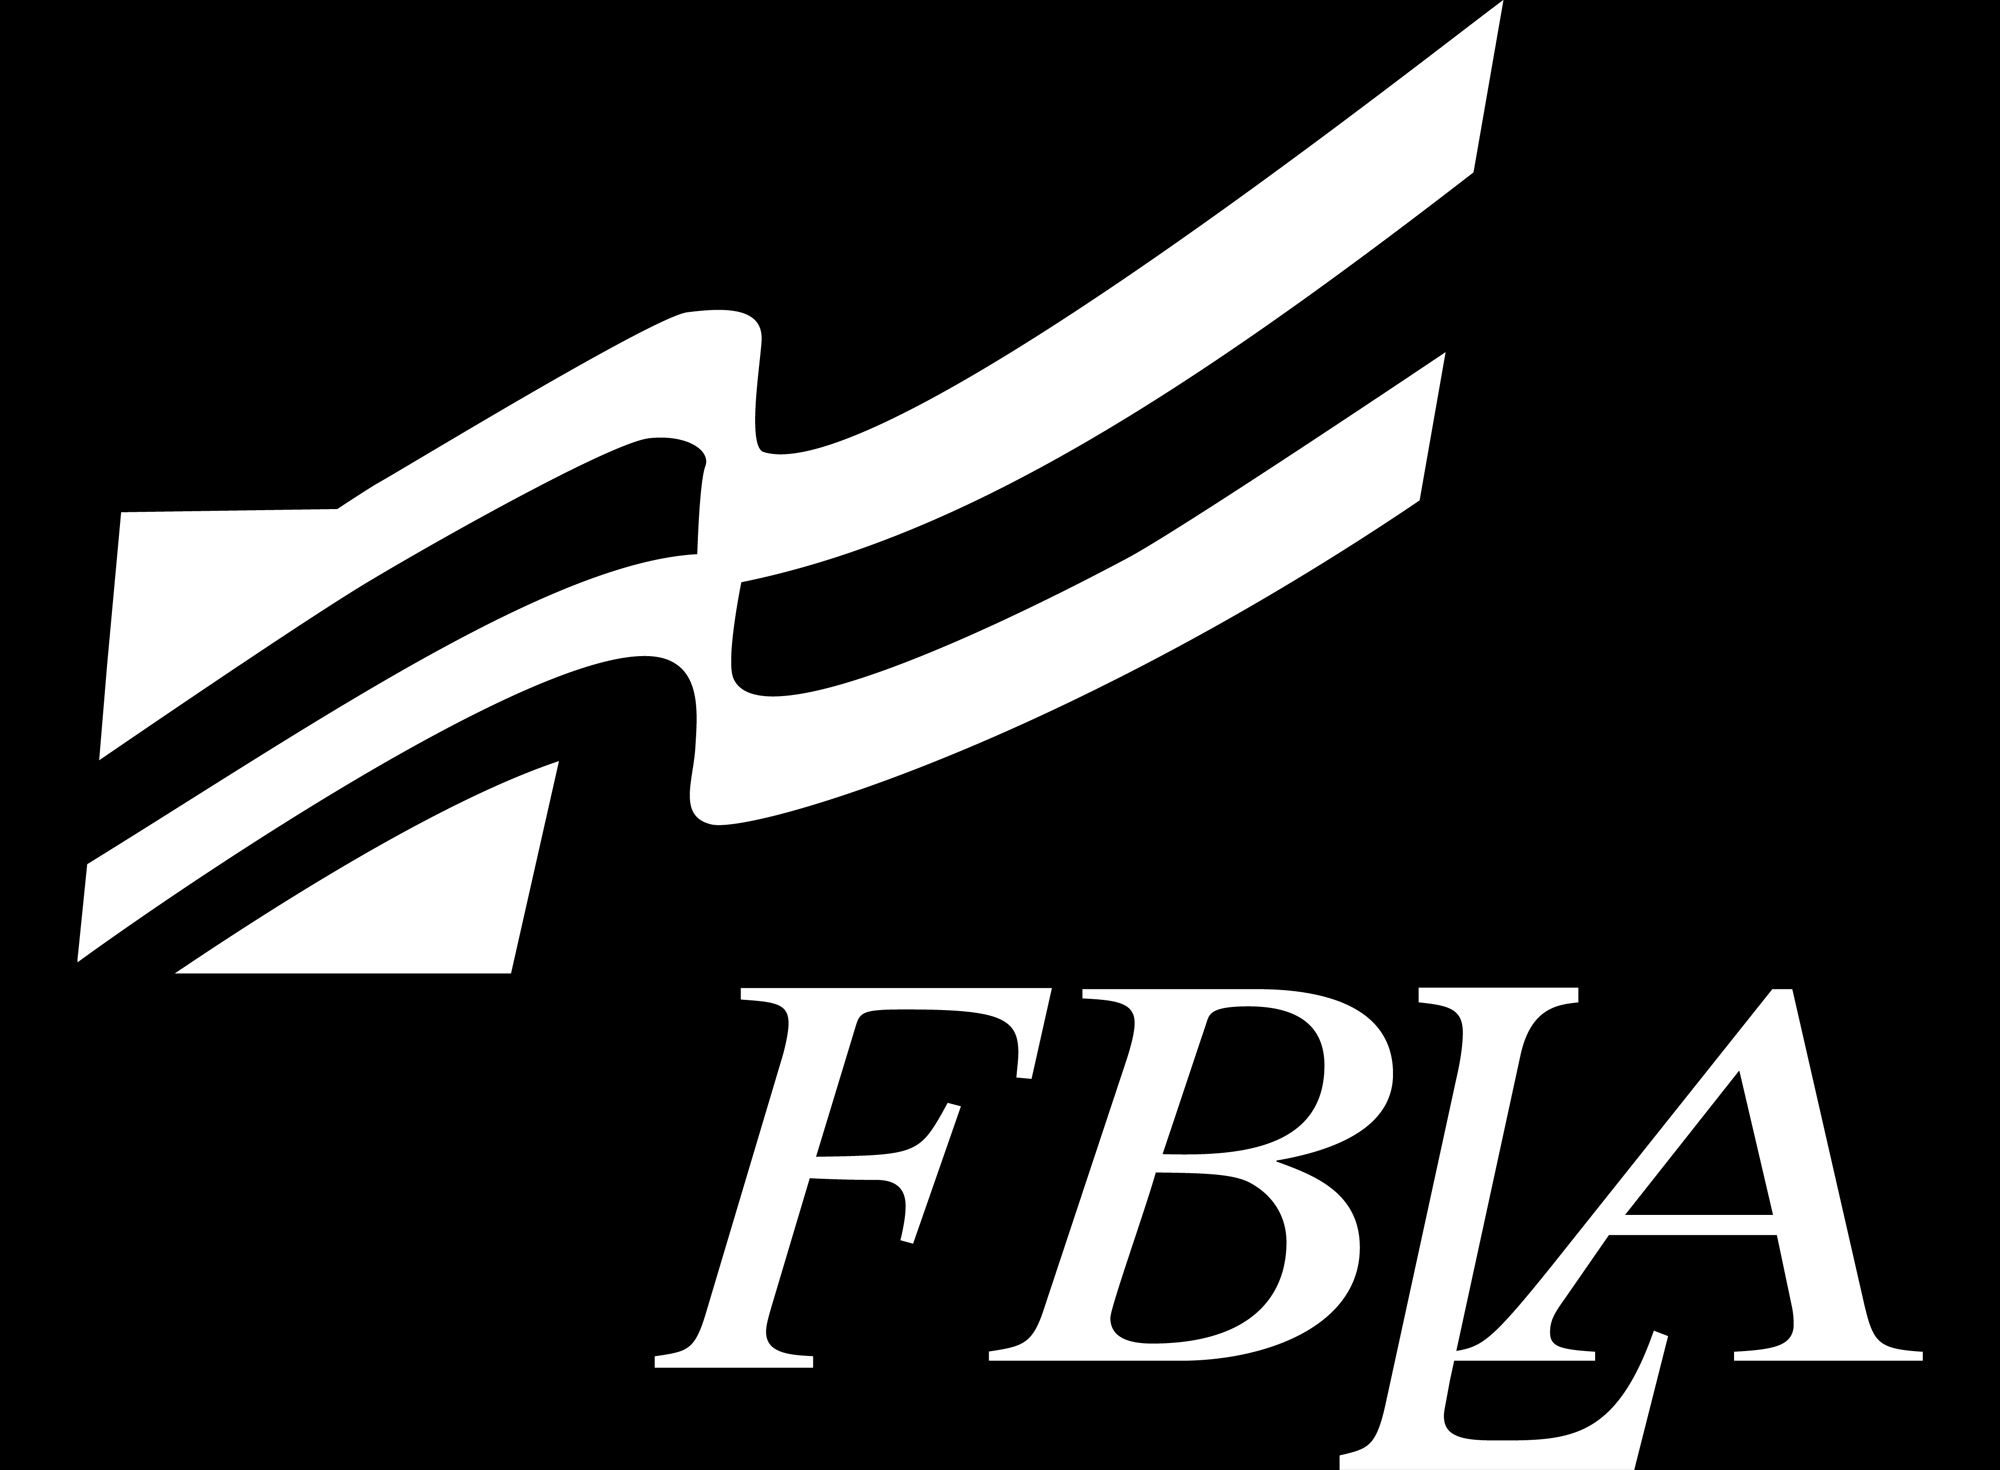 Free download Meaning FBLA logo and symbol history and evolution